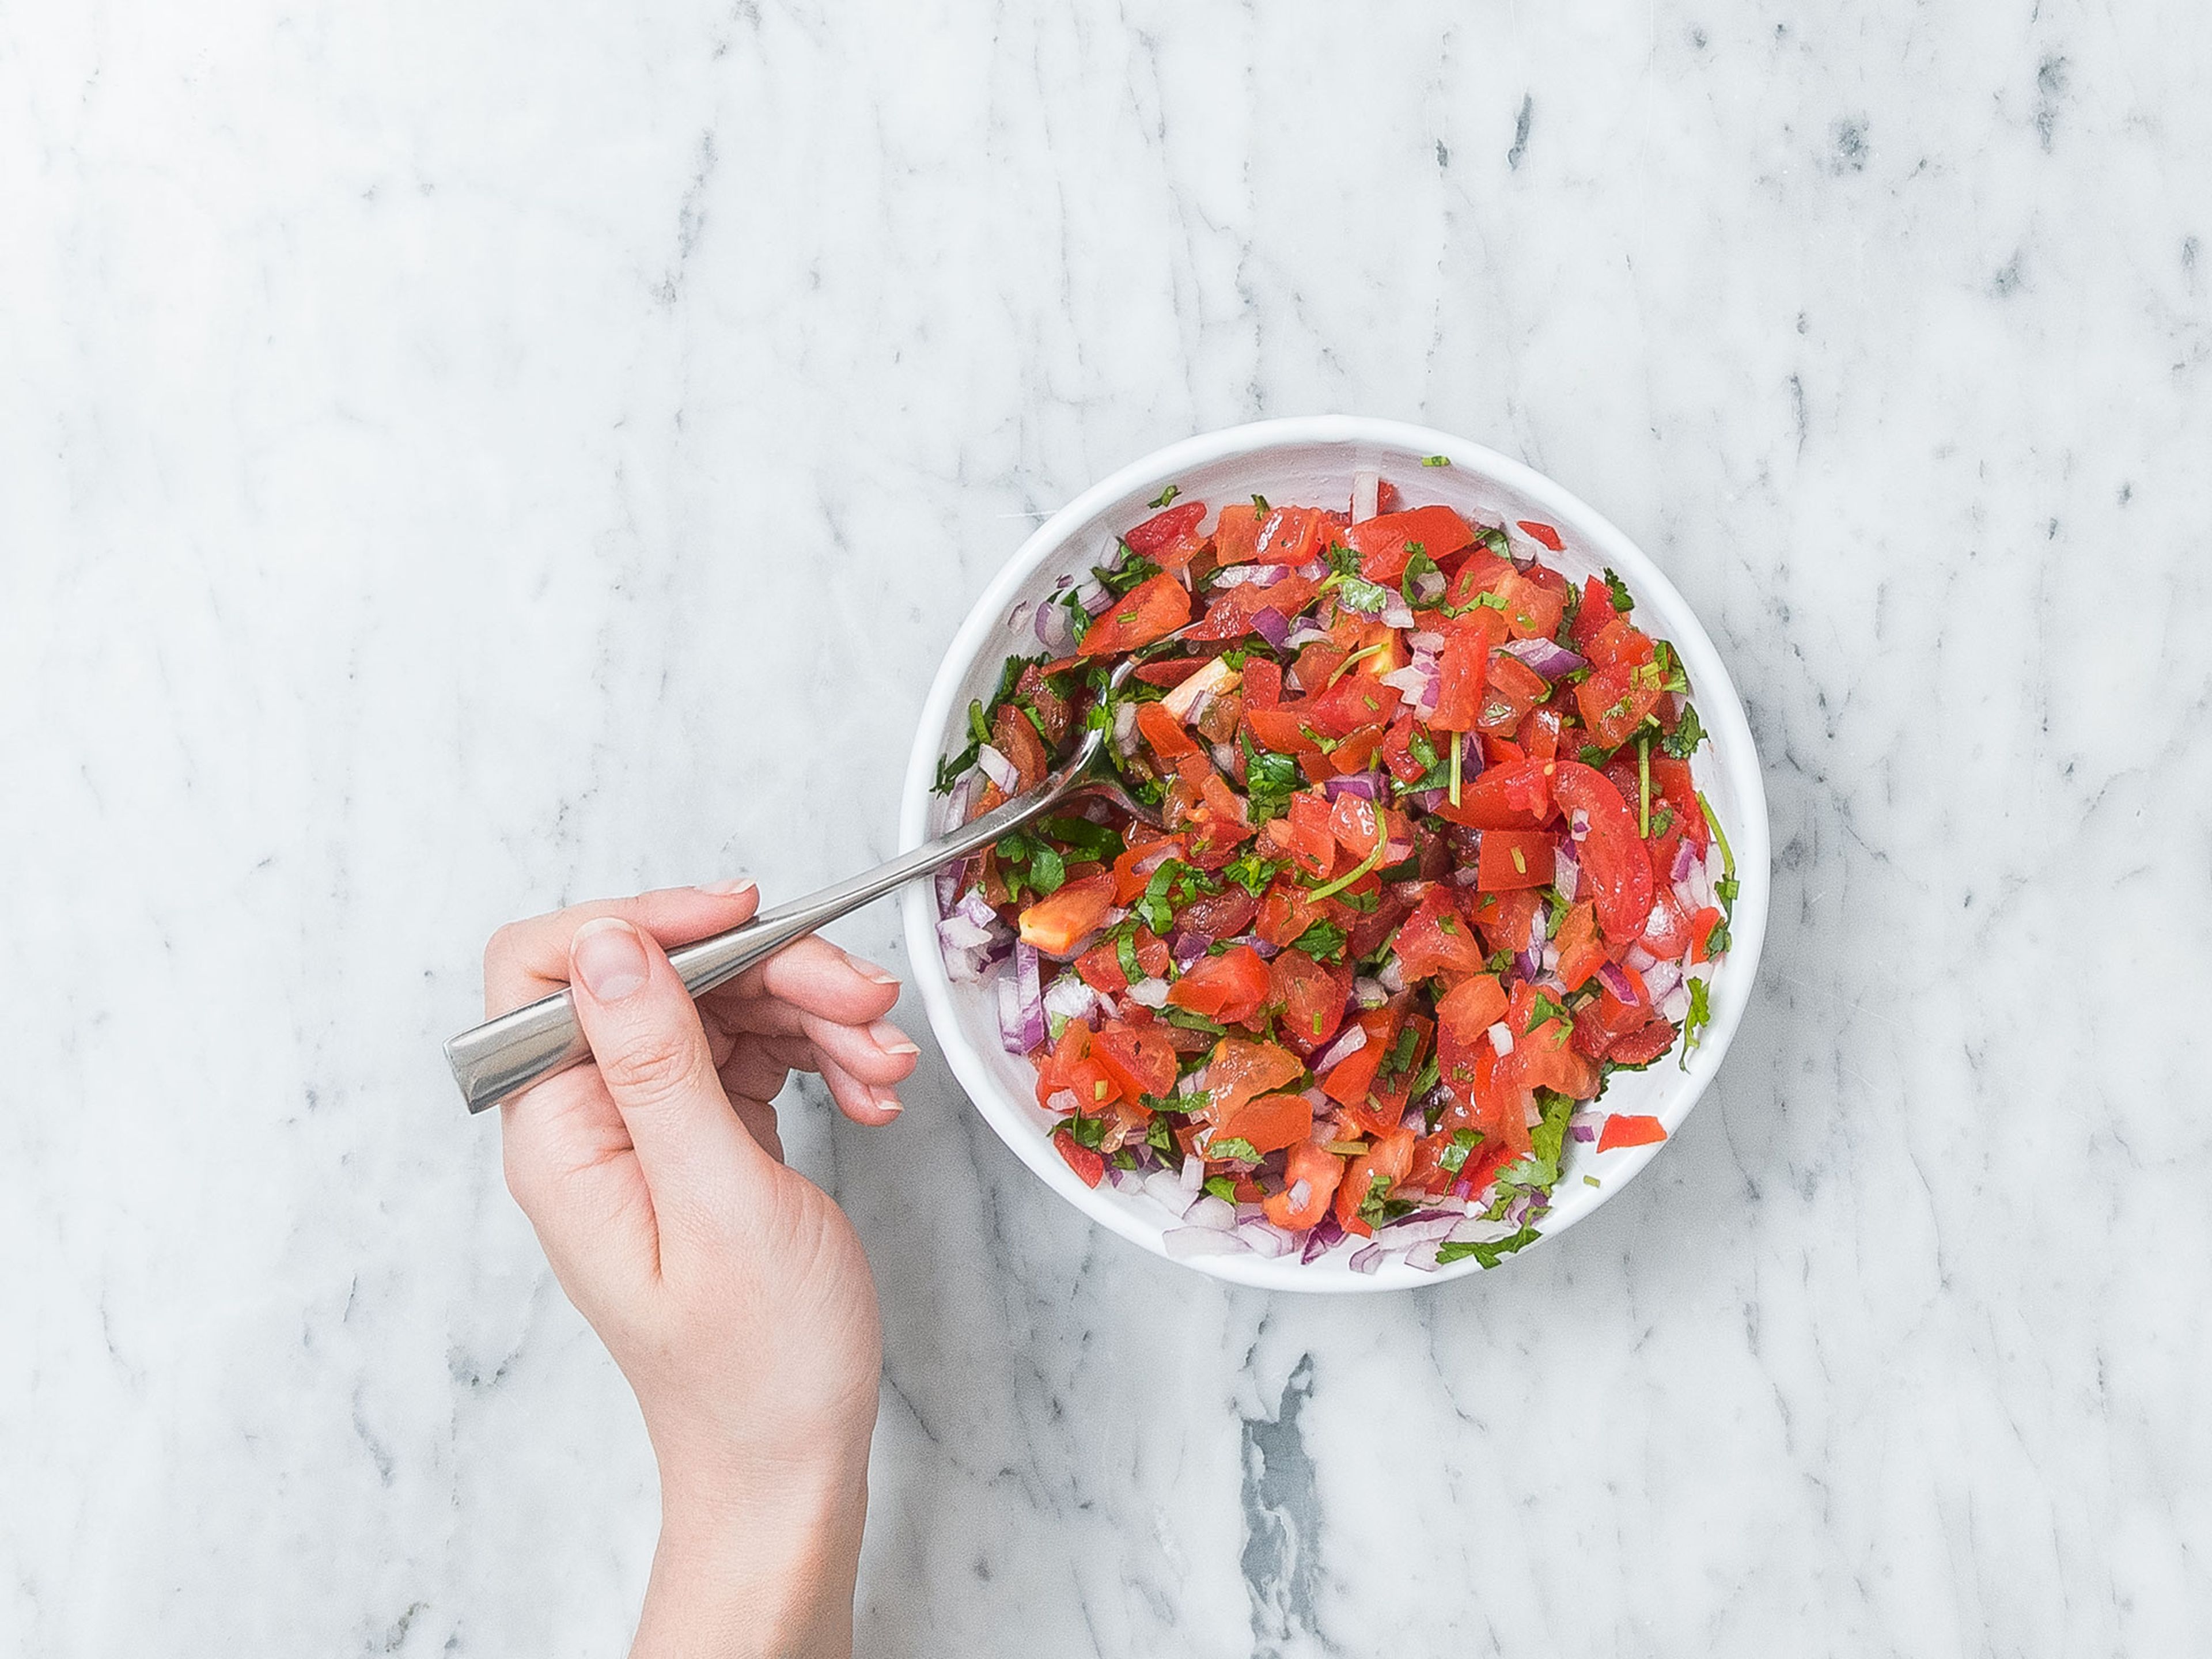 Halve tomatoes, remove seeds and finely dice. Peel and finely dice red onion. Finely chop cilantro. Add tomatoes, red onion and cilantro to a mixing bowl and stir to combine. Set aside.